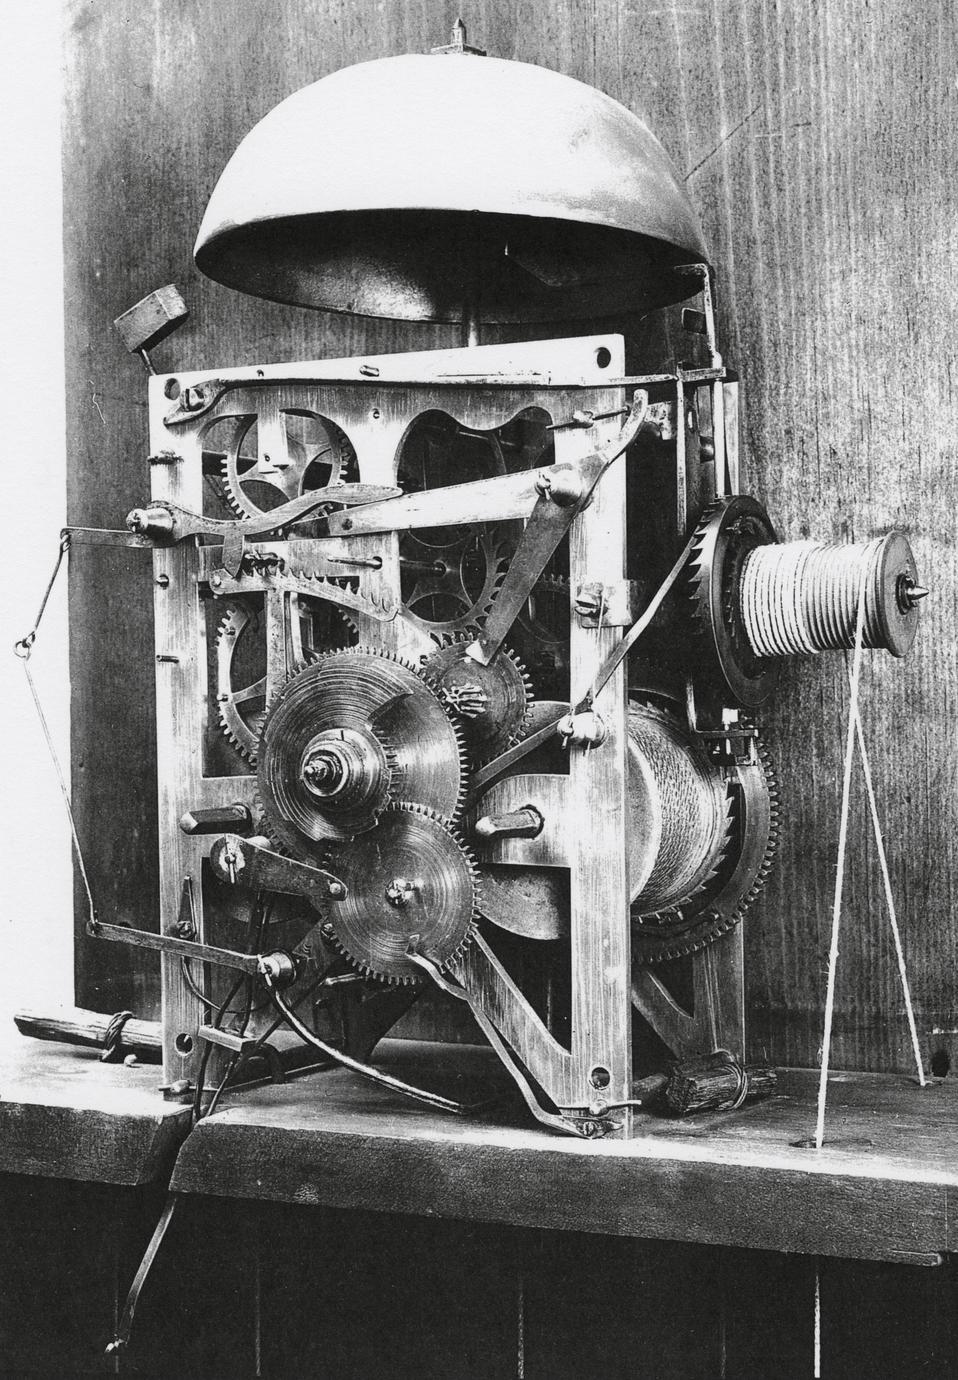 Black and white photograph of the gear system from an eight-day, strike, repeater, alarm clock.